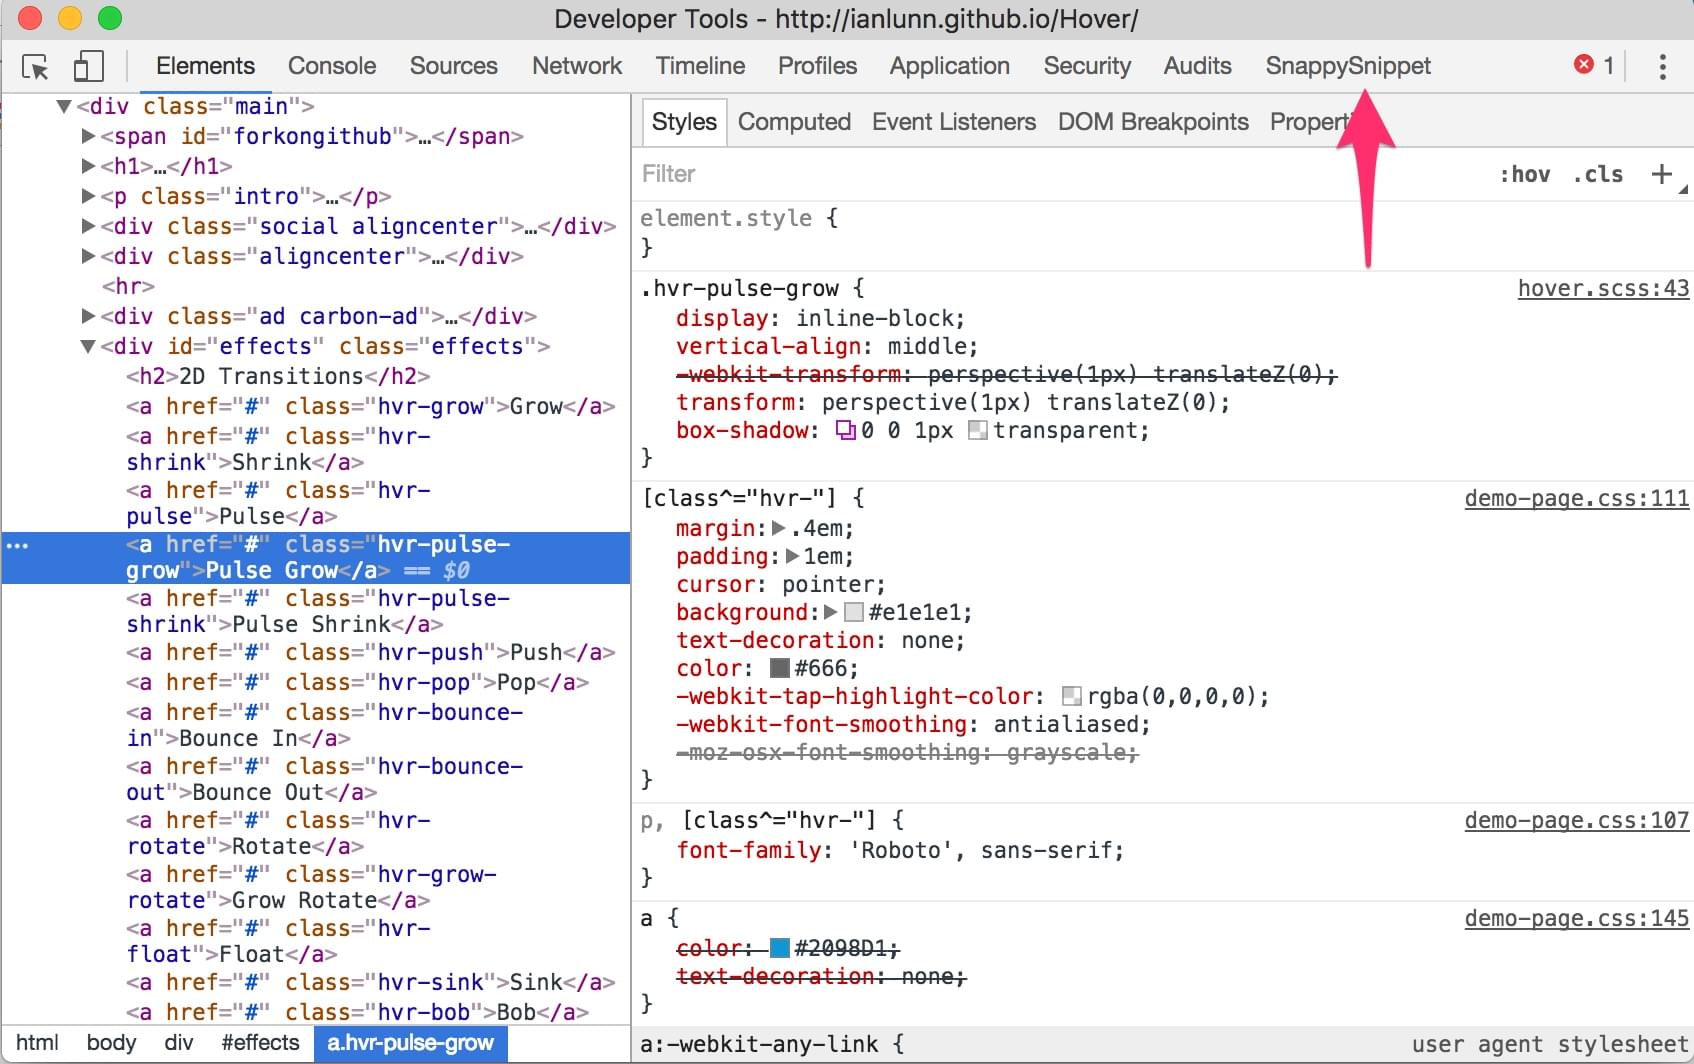 Chrome Devtools - Snappy Snippet